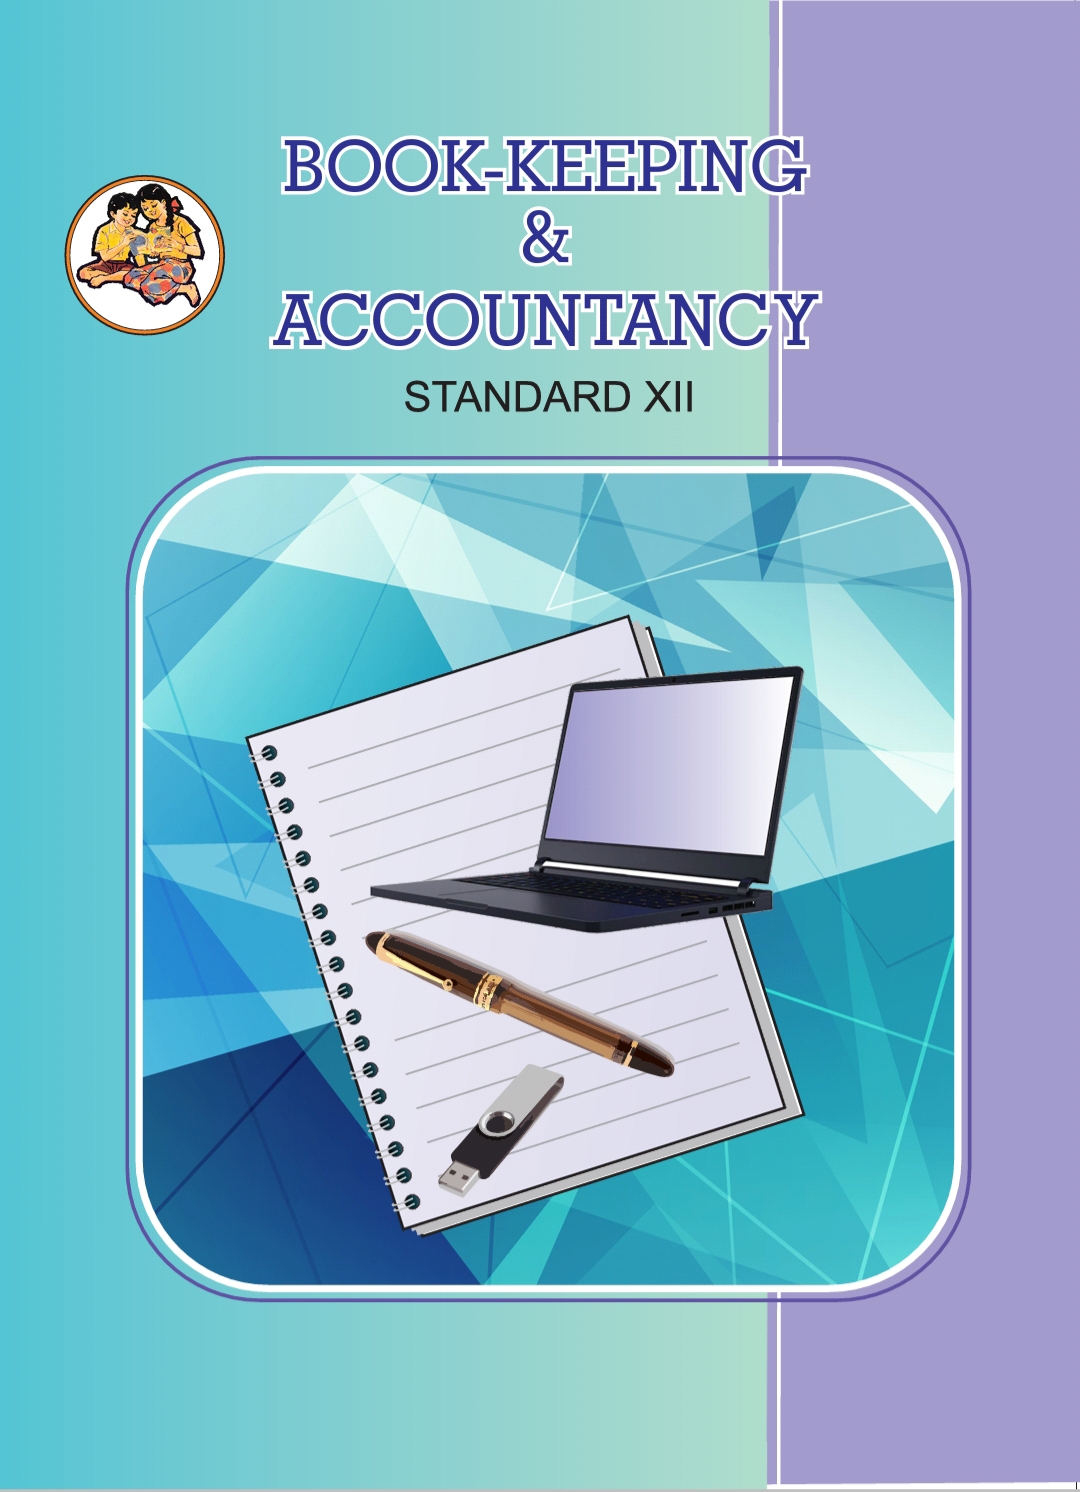 Accounting book. Bookkeeping & Accounting book. Accounting books. Bookkeeping учебник на русском pdf. 19. Book-keeping and Accounting.